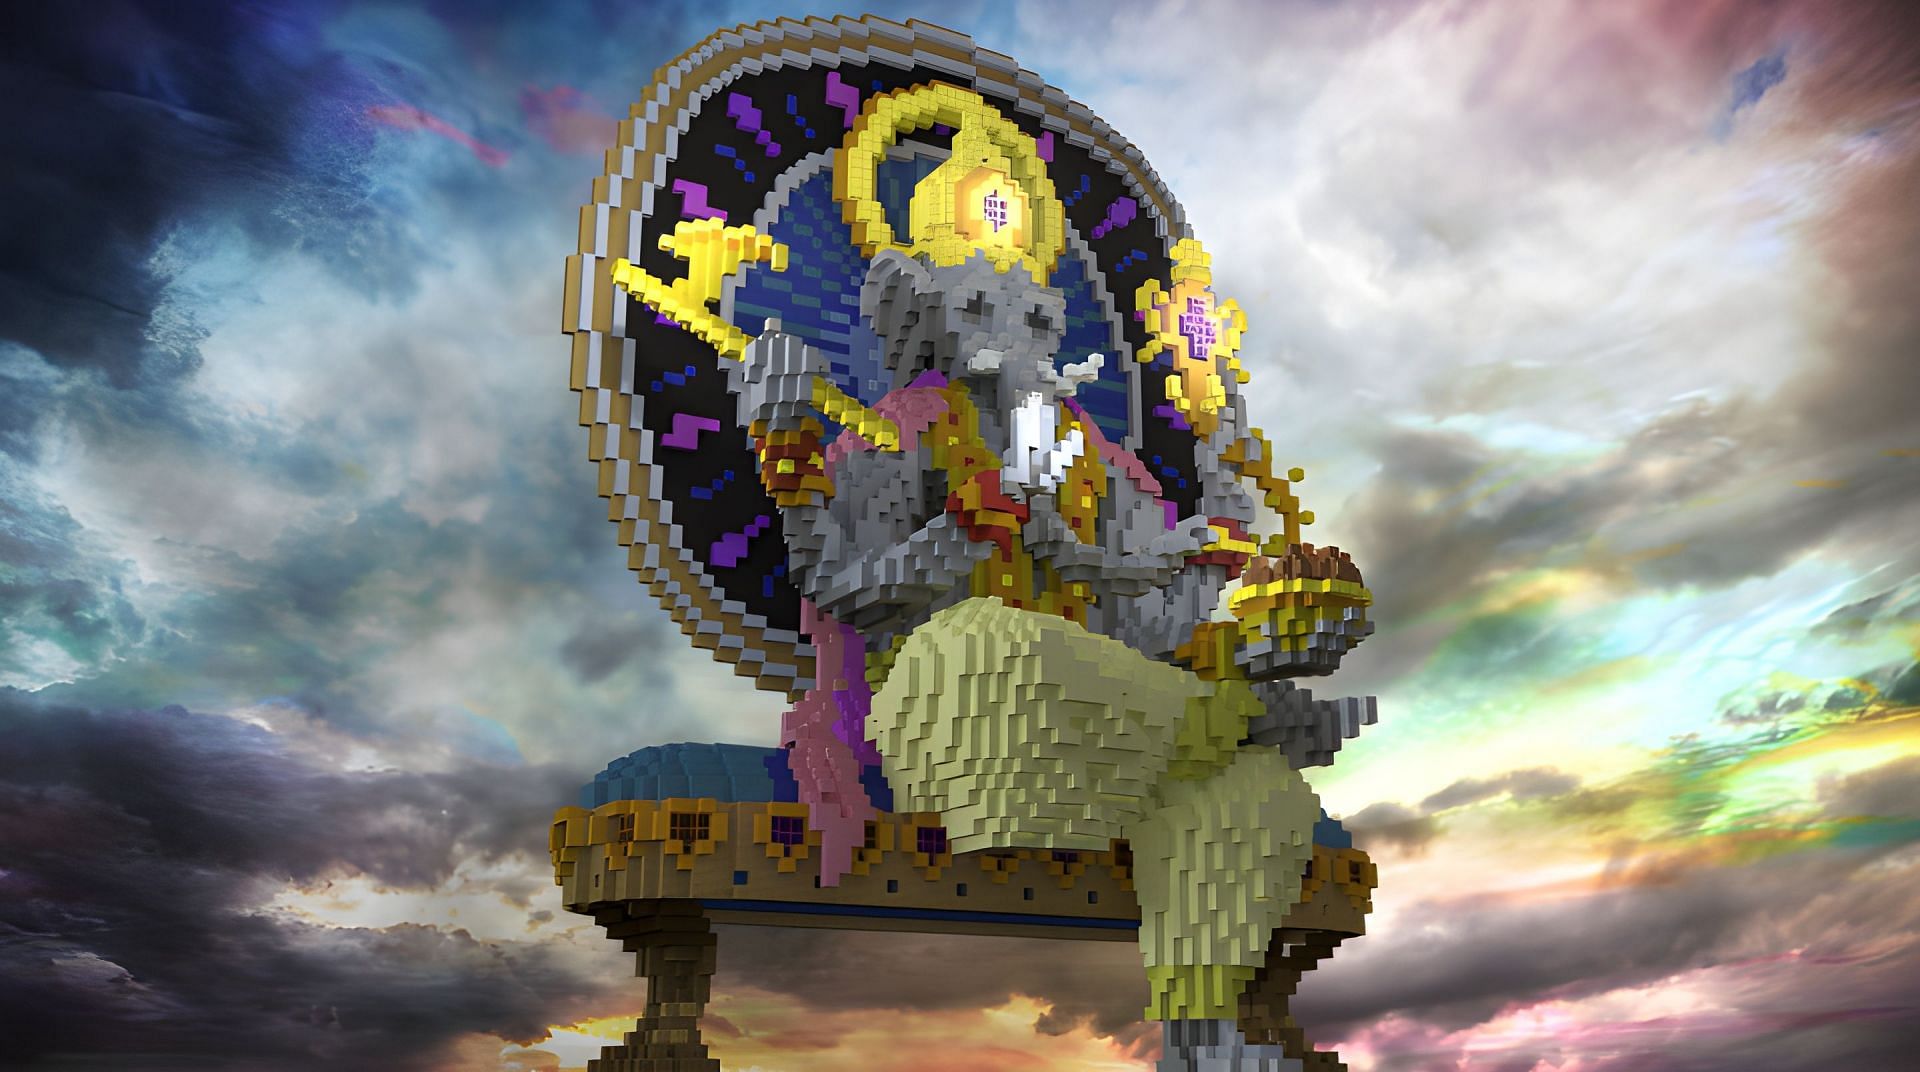 A plethora of Lord Ganesh Minecraft builds can be found around the internet (Image via planetminecraft)